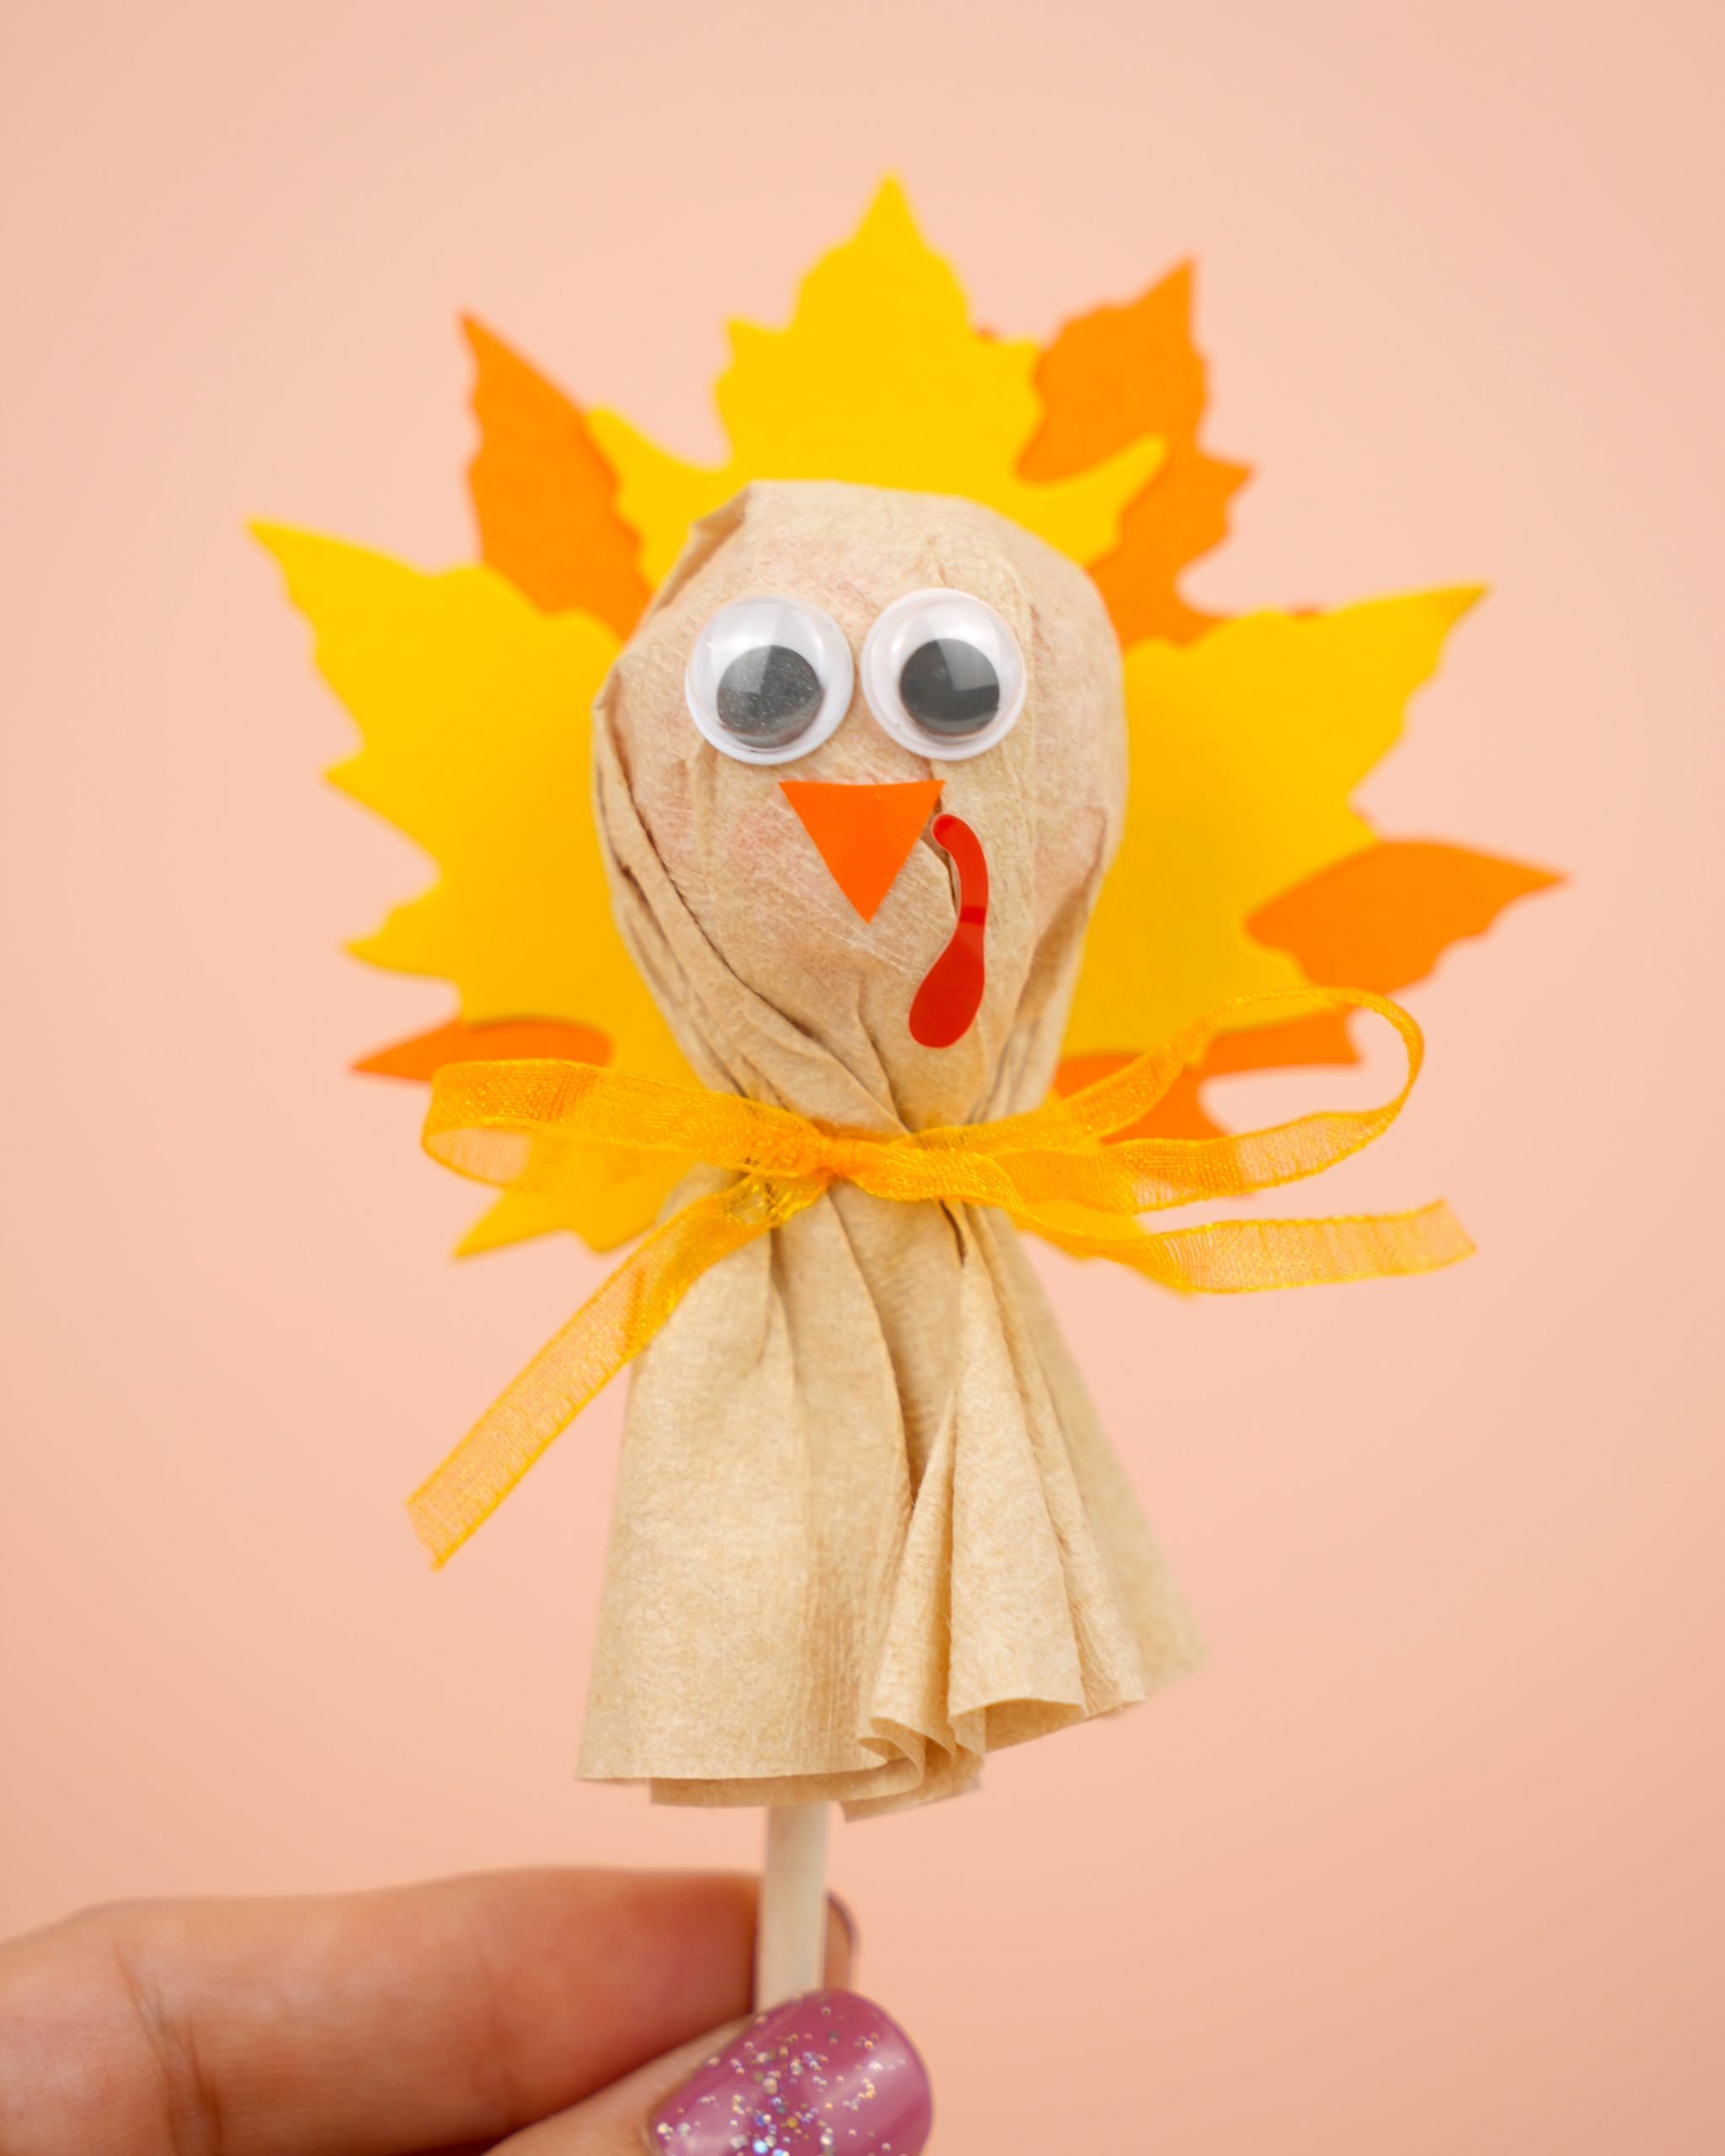 adorable turkey craft project for kids held up